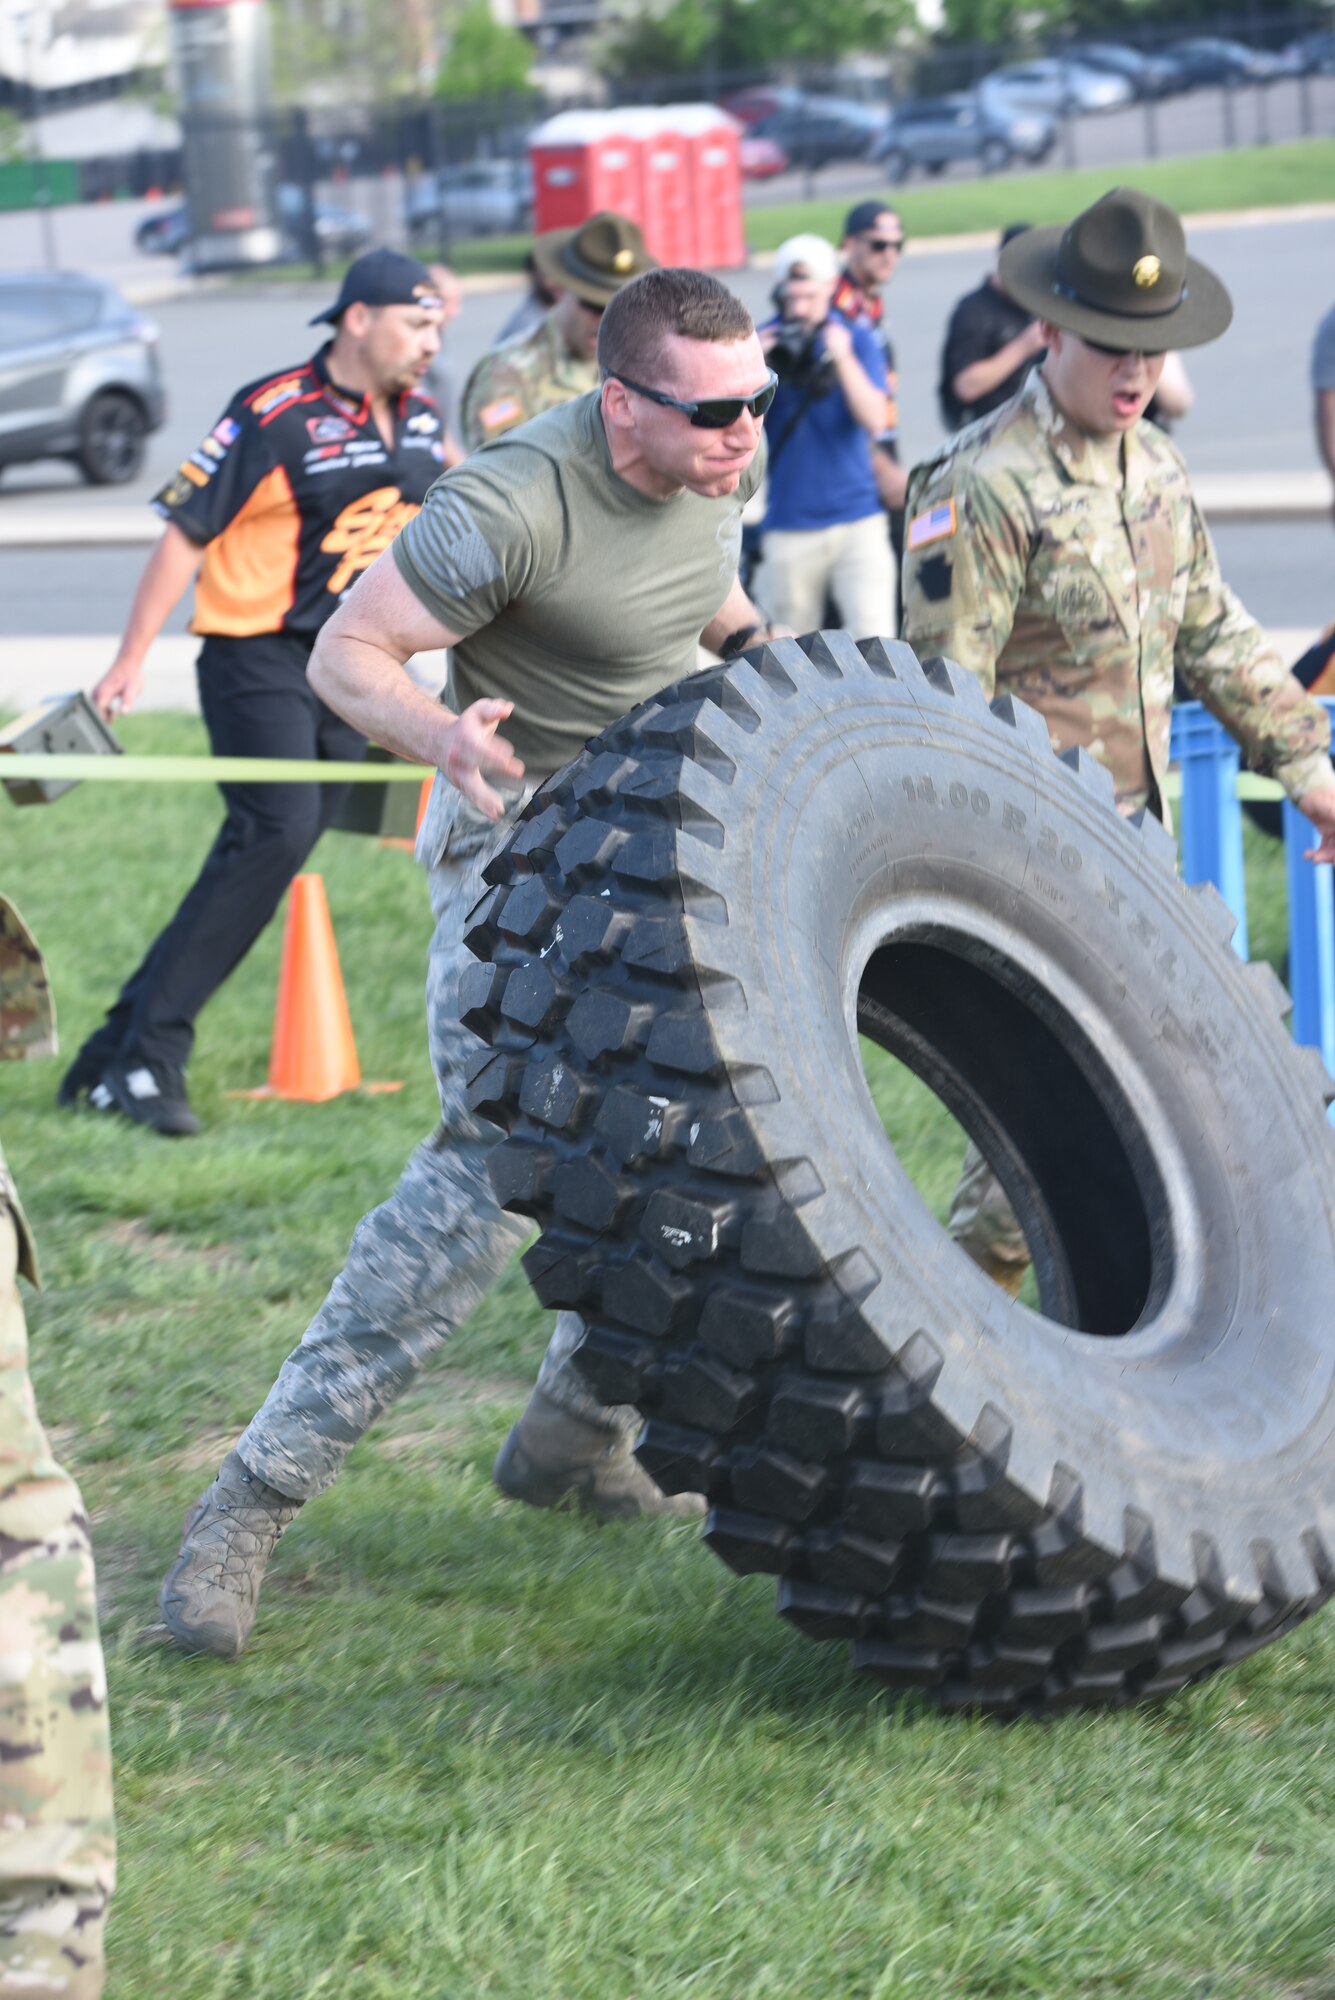 A five-man team from the 193rd Special Operations Security Forces Squadron competes in the inaugural Military and Pit Crew Challenge, in Philadelphia, Pennsylvania, Tuesday, May 8, 2018. The challenge was one of the third annual NASCAR XFINITY Philadelphia Takeover events brought to Philadelphia by Pocono Raceway, Dover International Speedway and Comcast to celebrate the sport in advance of upcoming races near at Pocono and Dover. (U.S. Air Force Photo by Master Sgt. Culeen Shaffer/Released)